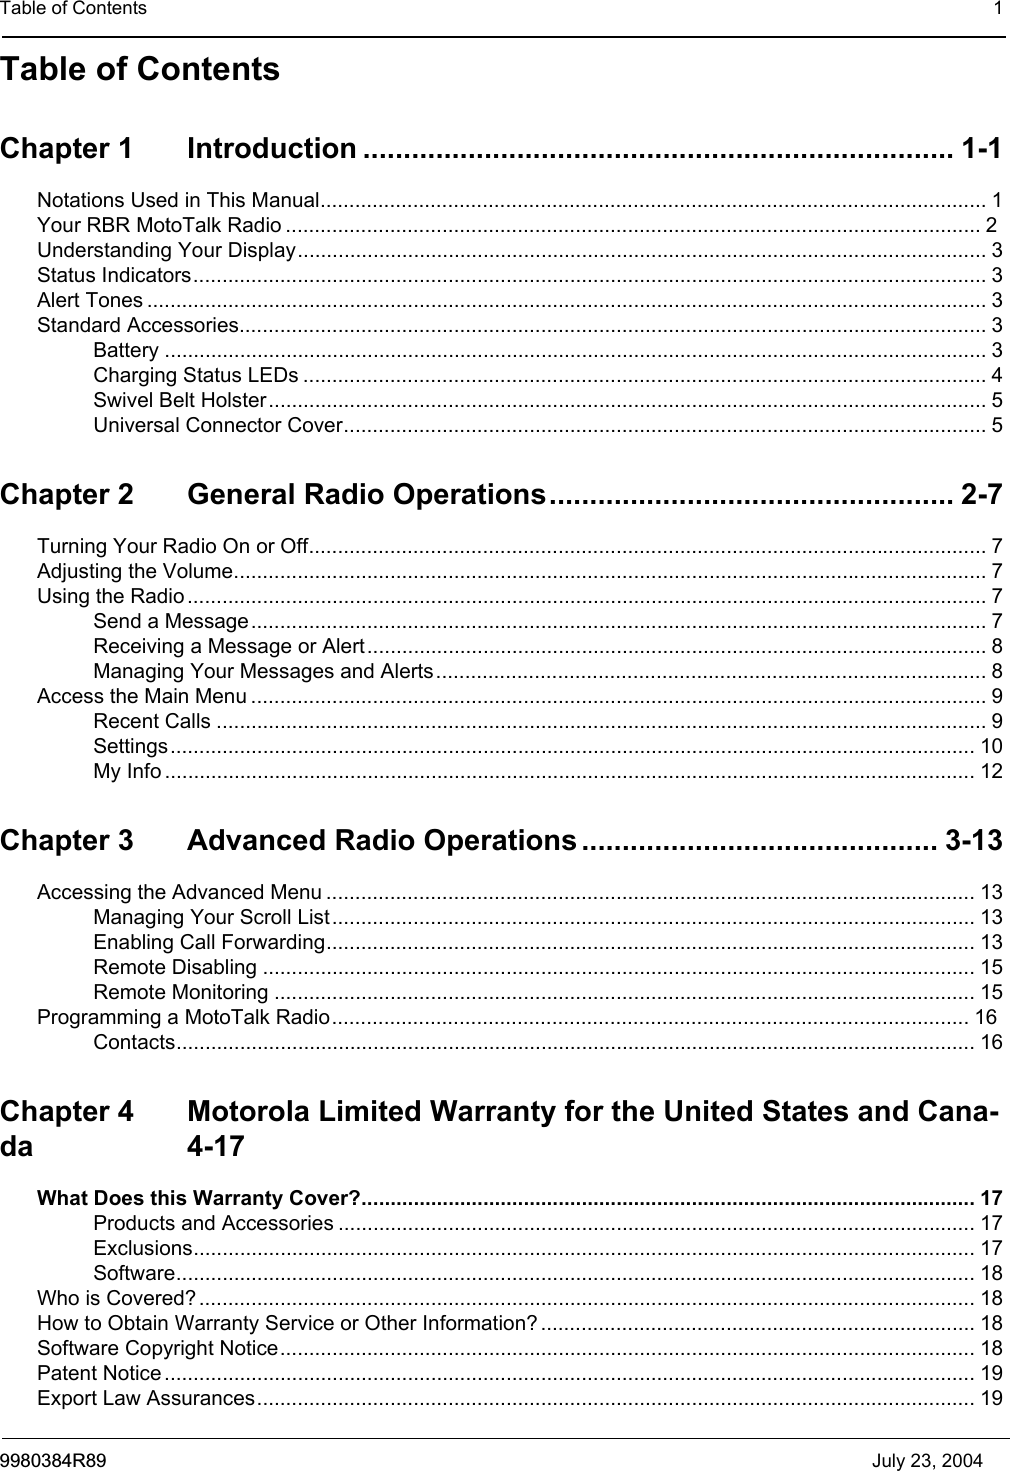 Table of Contents 19980384R89 July 23, 2004Table of ContentsChapter 1 Introduction ......................................................................... 1-1Notations Used in This Manual................................................................................................................... 1Your RBR MotoTalk Radio ........................................................................................................................ 2Understanding Your Display....................................................................................................................... 3Status Indicators......................................................................................................................................... 3Alert Tones ................................................................................................................................................. 3Standard Accessories................................................................................................................................. 3Battery .............................................................................................................................................. 3Charging Status LEDs ...................................................................................................................... 4Swivel Belt Holster............................................................................................................................ 5Universal Connector Cover............................................................................................................... 5Chapter 2 General Radio Operations.................................................. 2-7Turning Your Radio On or Off..................................................................................................................... 7Adjusting the Volume.................................................................................................................................. 7Using the Radio .......................................................................................................................................... 7Send a Message............................................................................................................................... 7Receiving a Message or Alert........................................................................................................... 8Managing Your Messages and Alerts...............................................................................................8Access the Main Menu ............................................................................................................................... 9Recent Calls ..................................................................................................................................... 9Settings........................................................................................................................................... 10My Info ............................................................................................................................................ 12Chapter 3 Advanced Radio Operations ............................................ 3-13Accessing the Advanced Menu ................................................................................................................ 13Managing Your Scroll List............................................................................................................... 13Enabling Call Forwarding................................................................................................................ 13Remote Disabling ........................................................................................................................... 15Remote Monitoring ......................................................................................................................... 15Programming a MotoTalk Radio.............................................................................................................. 16Contacts.......................................................................................................................................... 16Chapter 4 Motorola Limited Warranty for the United States and Cana-da 4-17What Does this Warranty Cover?.......................................................................................................... 17Products and Accessories .............................................................................................................. 17Exclusions....................................................................................................................................... 17Software.......................................................................................................................................... 18Who is Covered? ...................................................................................................................................... 18How to Obtain Warranty Service or Other Information? ........................................................................... 18Software Copyright Notice........................................................................................................................ 18Patent Notice ............................................................................................................................................ 19Export Law Assurances............................................................................................................................ 19